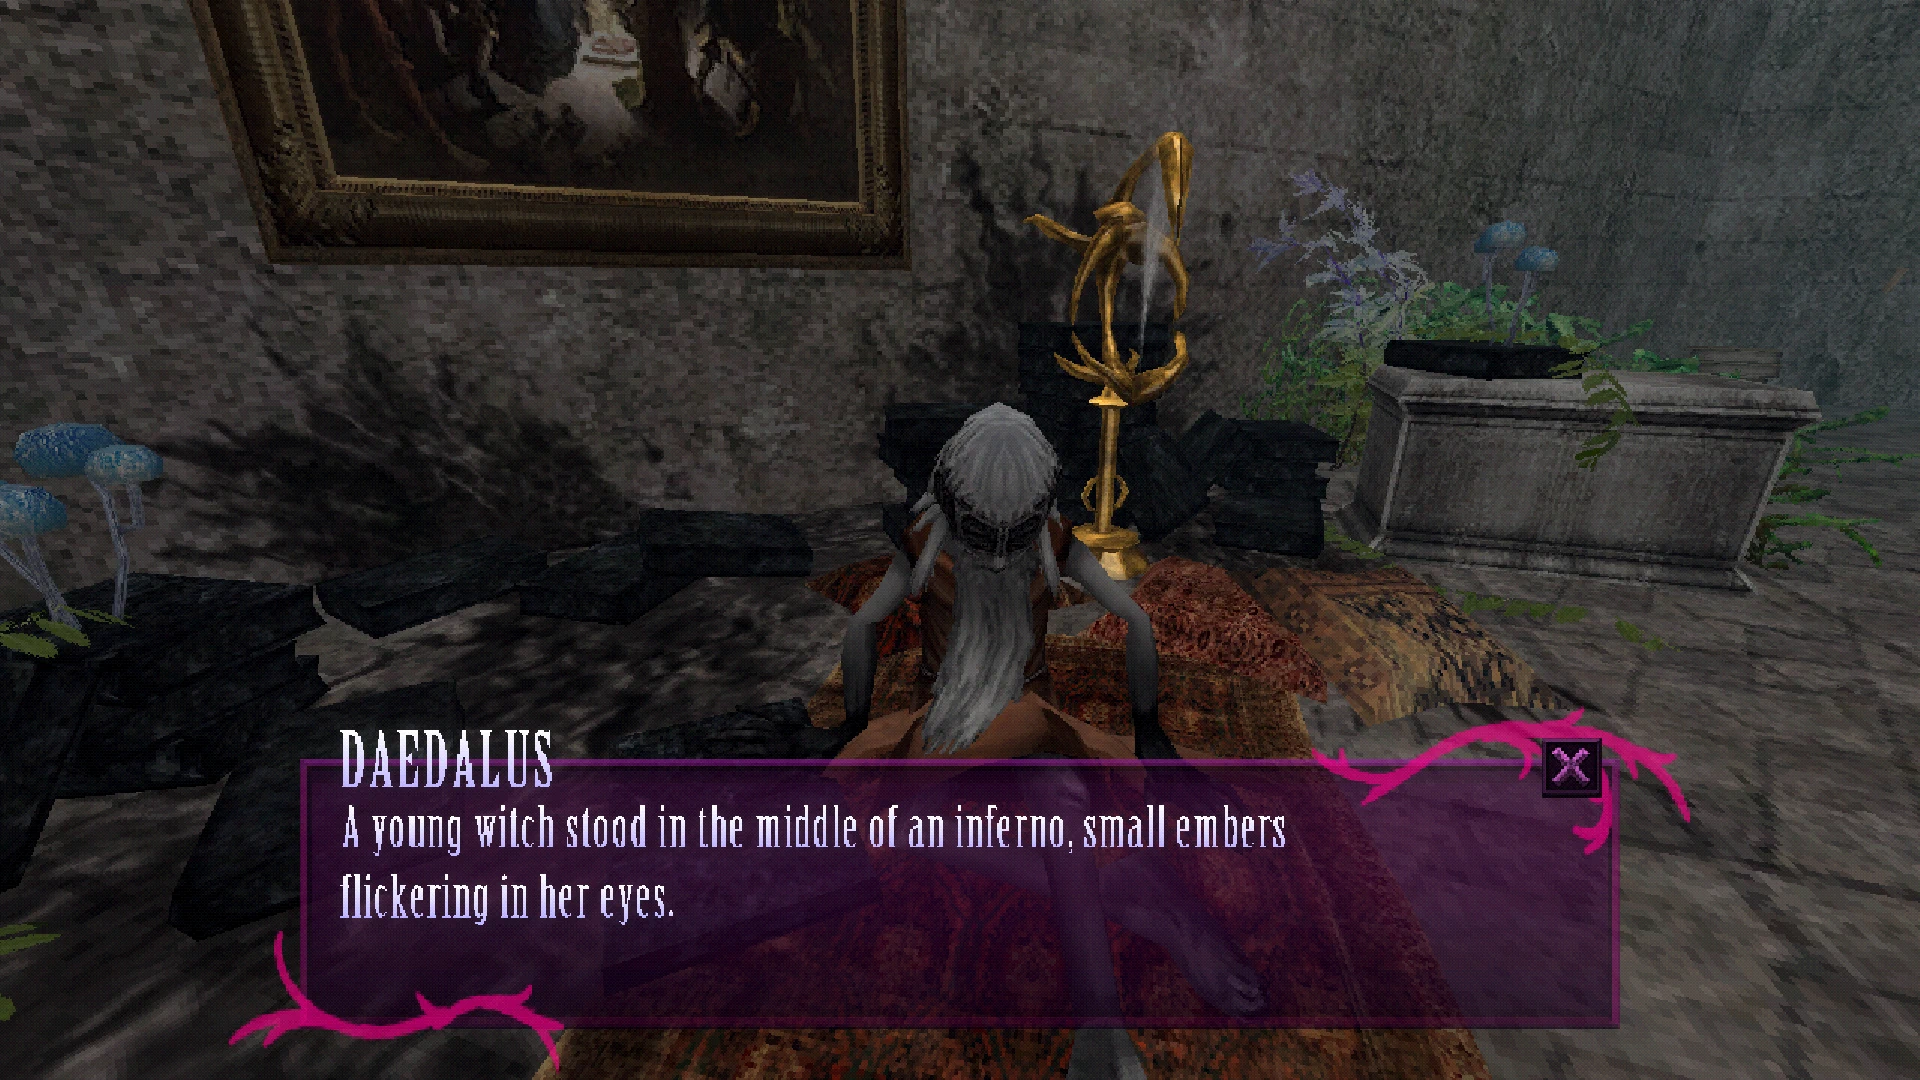 An image of the player conversing with a character named Daedalus.